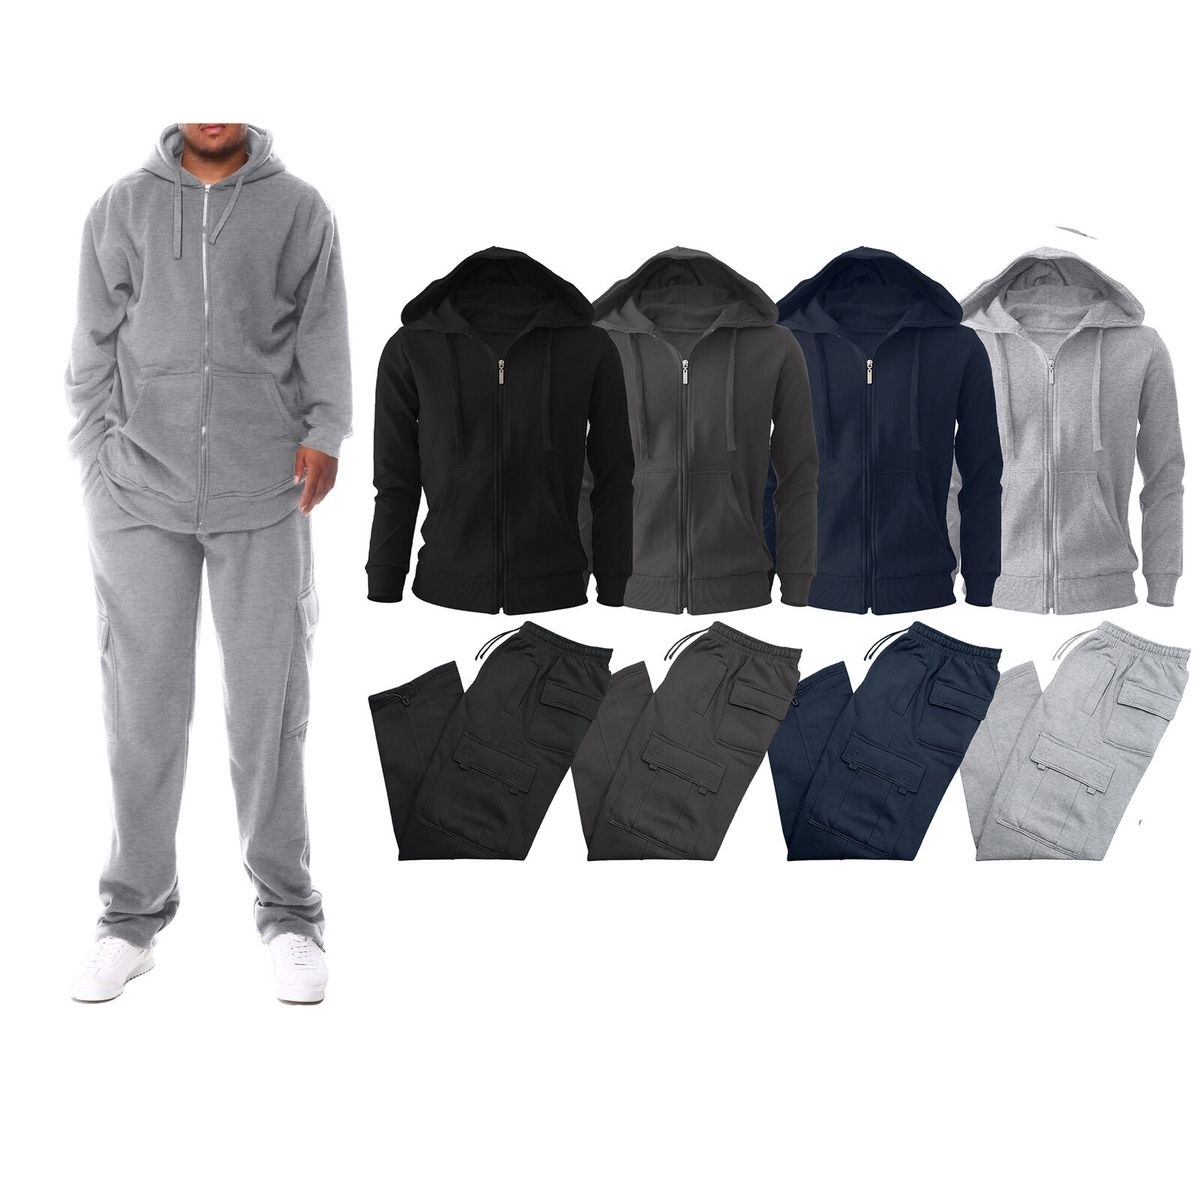 Multi-Pack: Men's Big & Tall Winter Warm Athletic Active Cozy Fleece Lined Multi-Pocket Full Zip Up Cargo Tracksuit - Charcoal, 2-pack, Xx-l